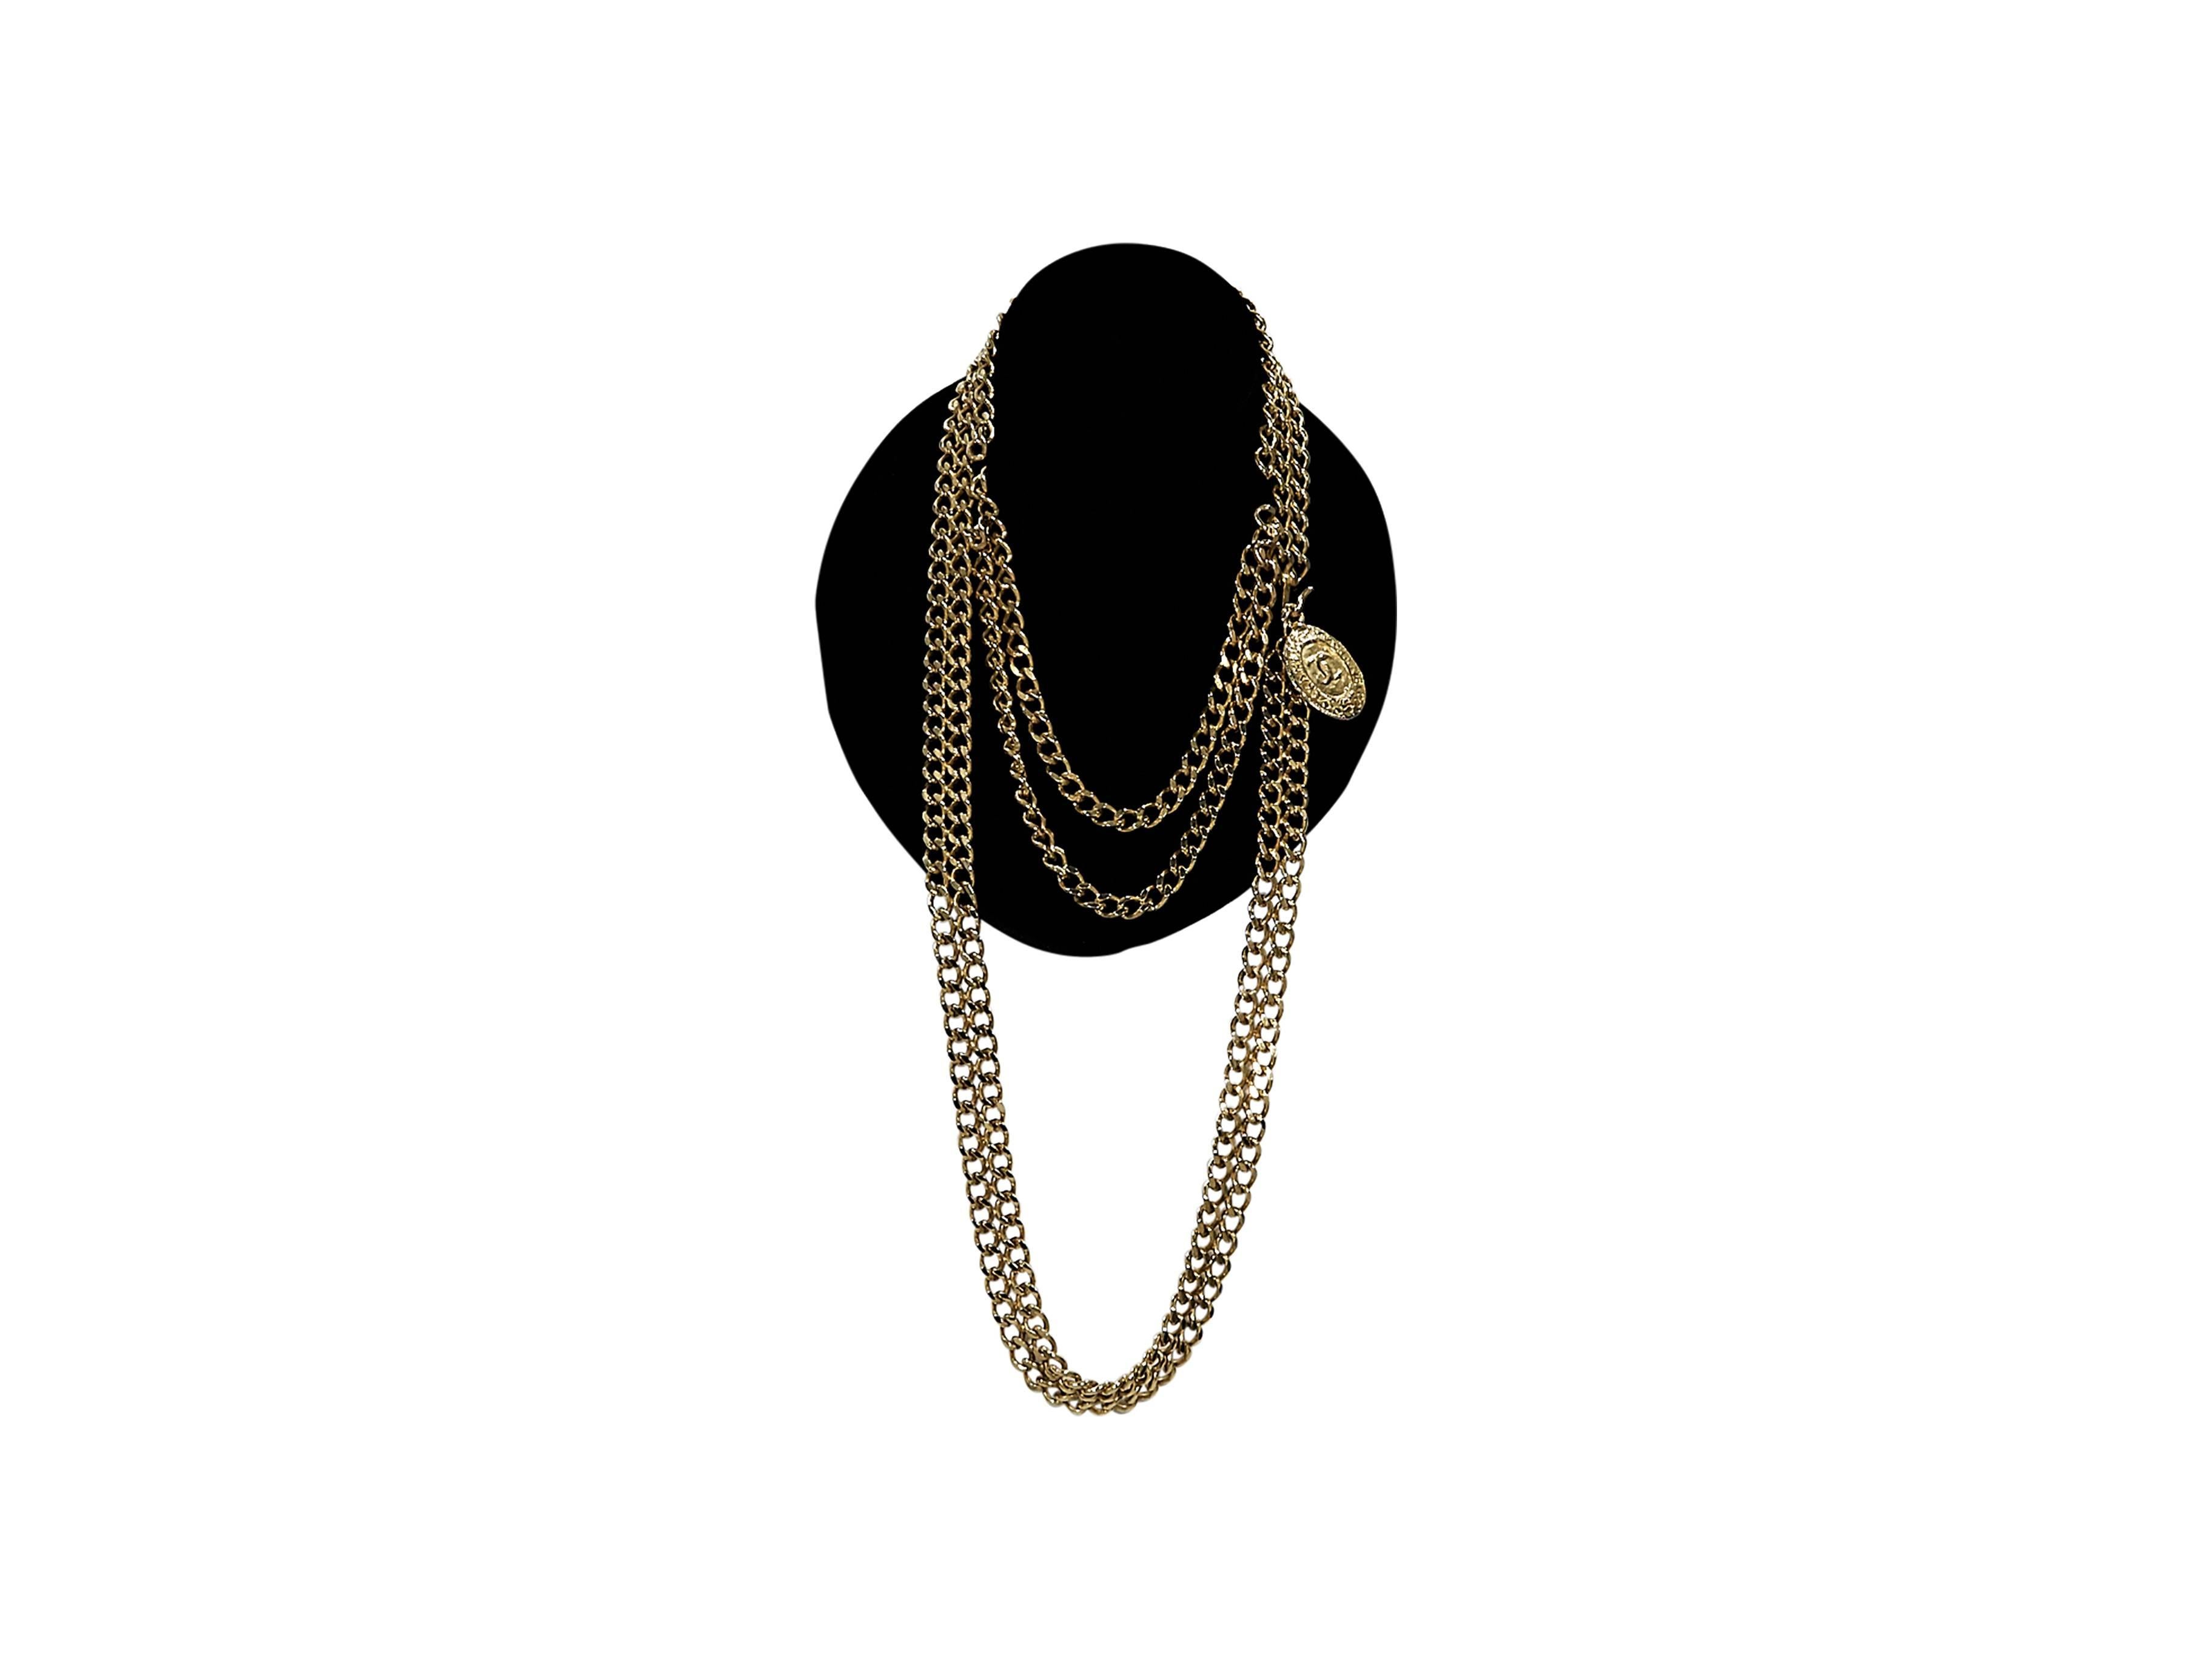 Product details:  Vintage goldtone chain belt by Chanel.  Hook closure.  Accented with a hanging charm.  31